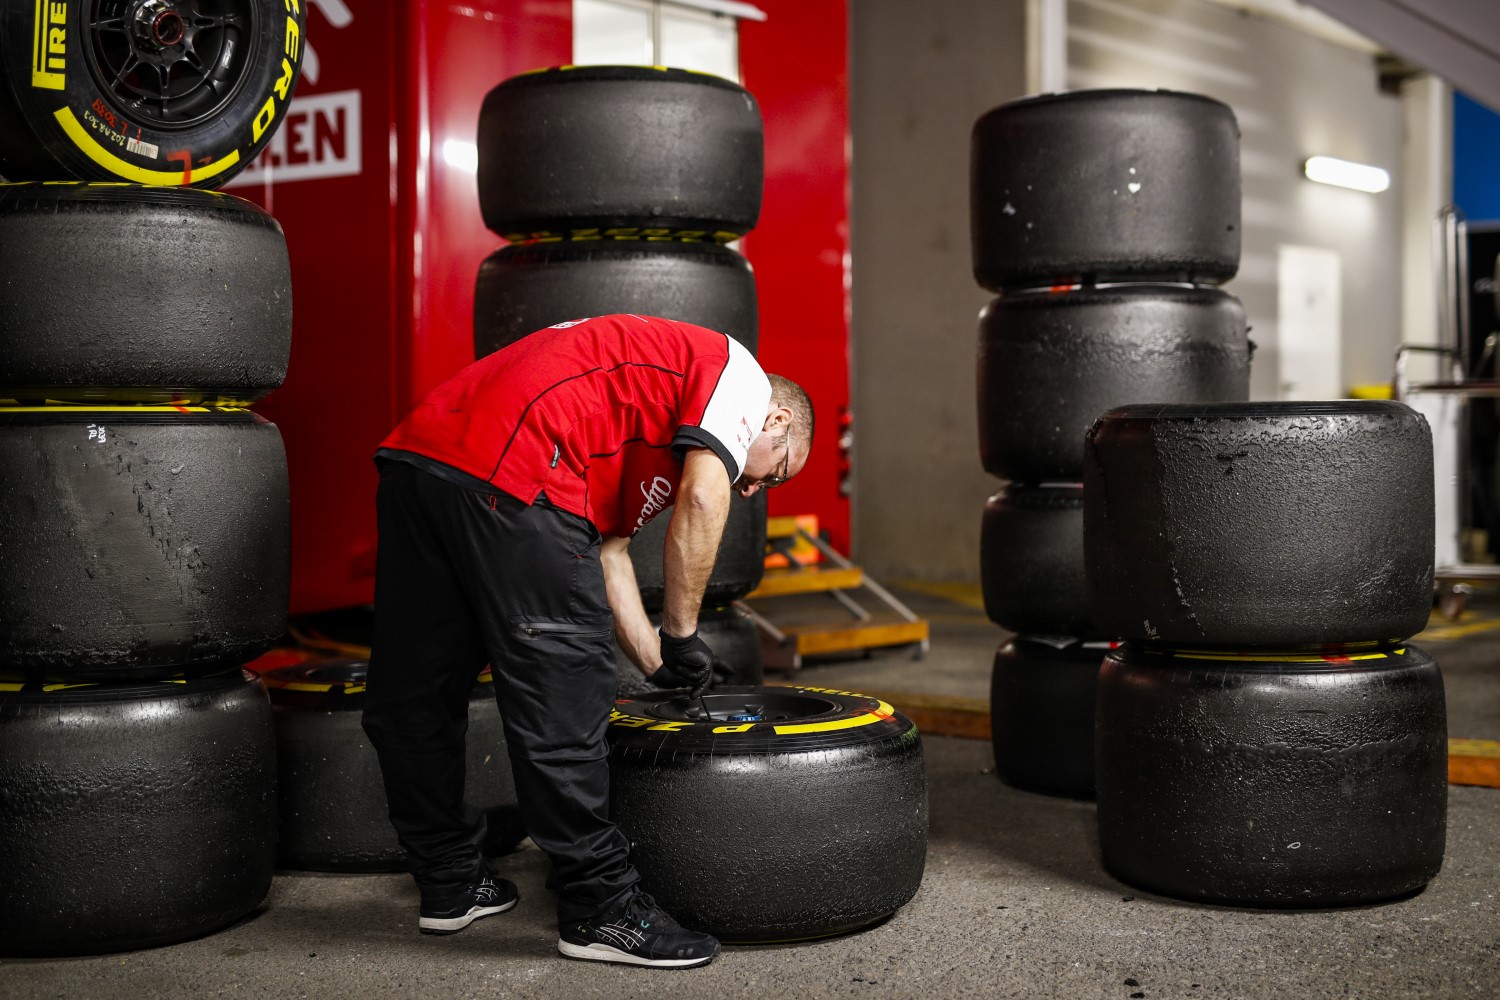 If the Pirelli Tire staff members get quarantined F1 races will have to be cancelled, or Pirelli will have to send tire mounters from other countries to backfill